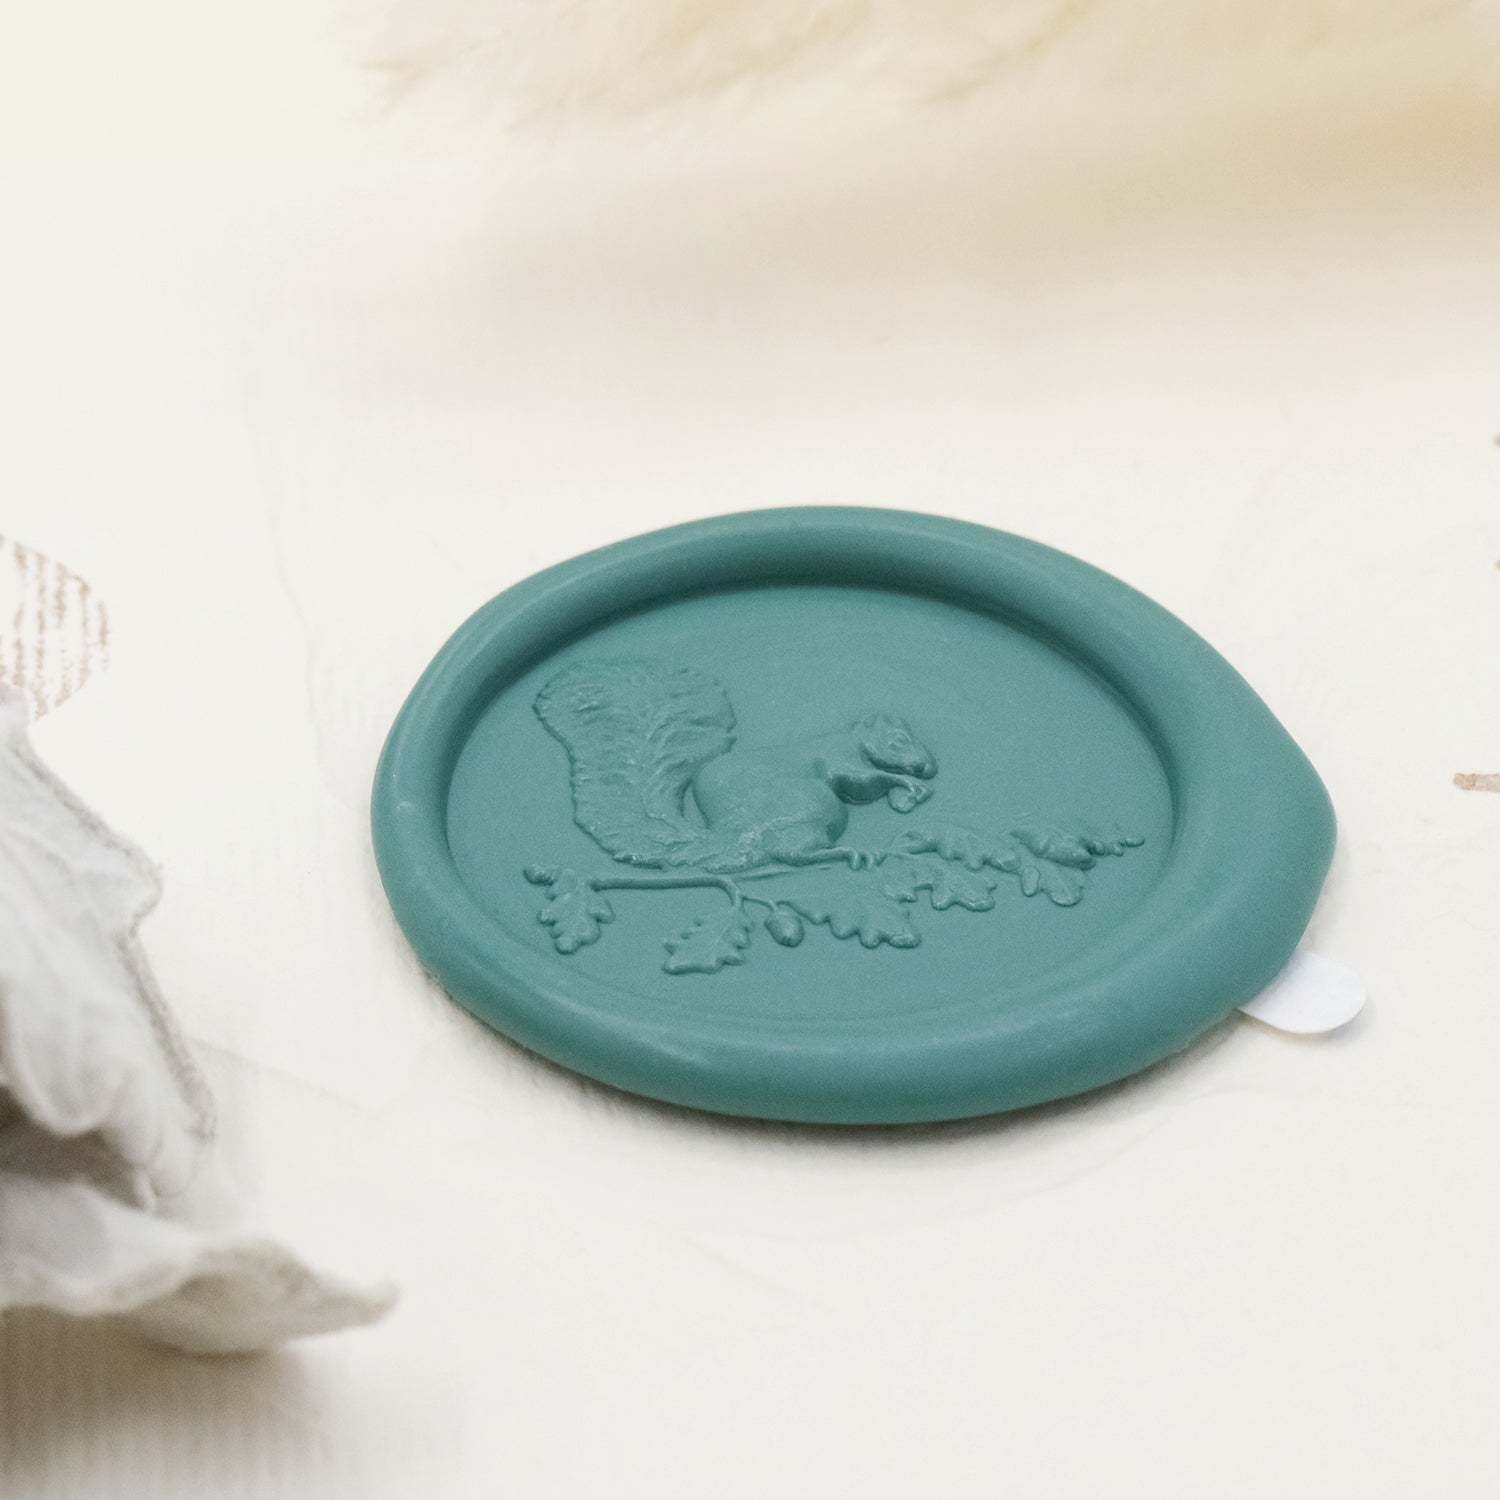 Stamprints 3D Relief Squirrel Self-adhesive Wax Seal Stickers 4